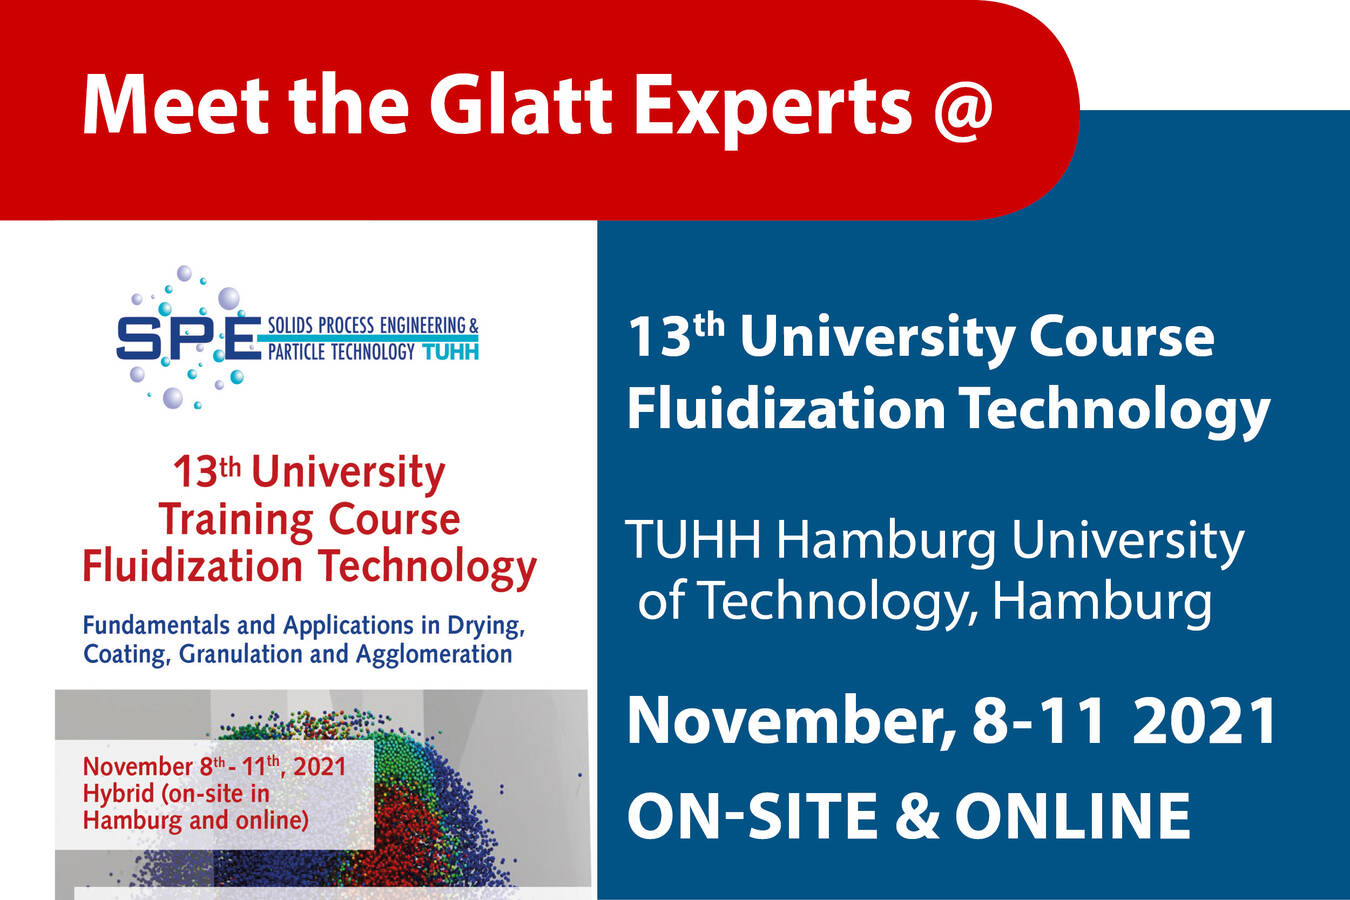 Meet the Glatt experts at 13th University Course Fluidization Technology, November 8-11, on-site in Hamburg and online